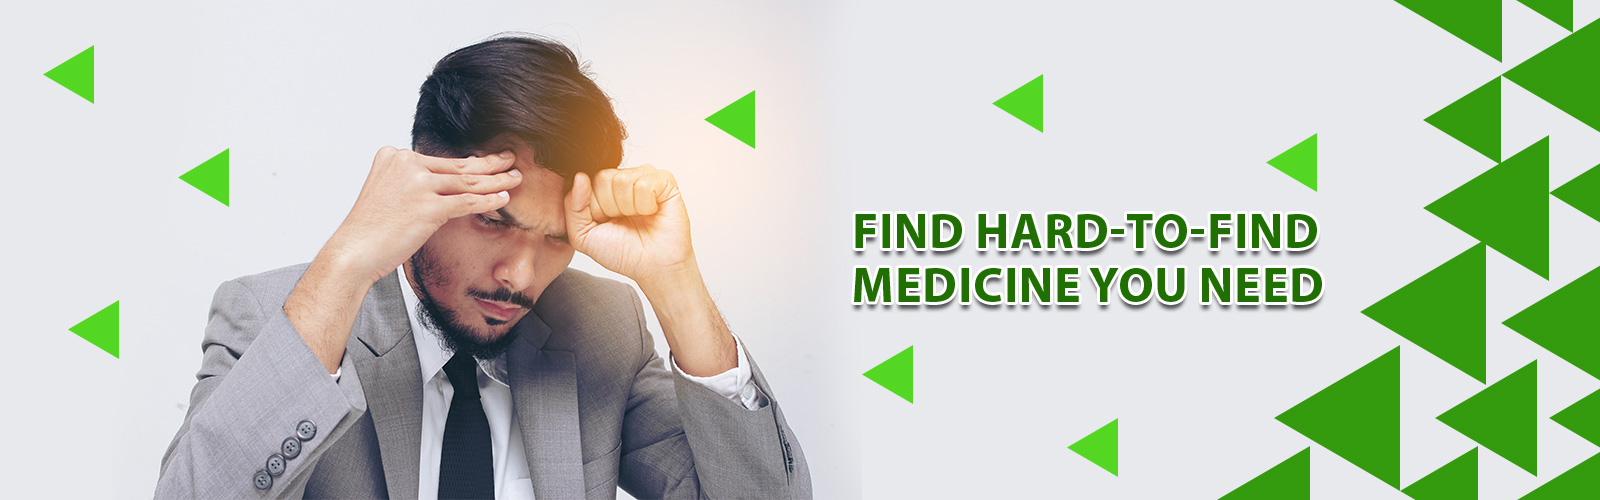 find hard-to-find medicine you need